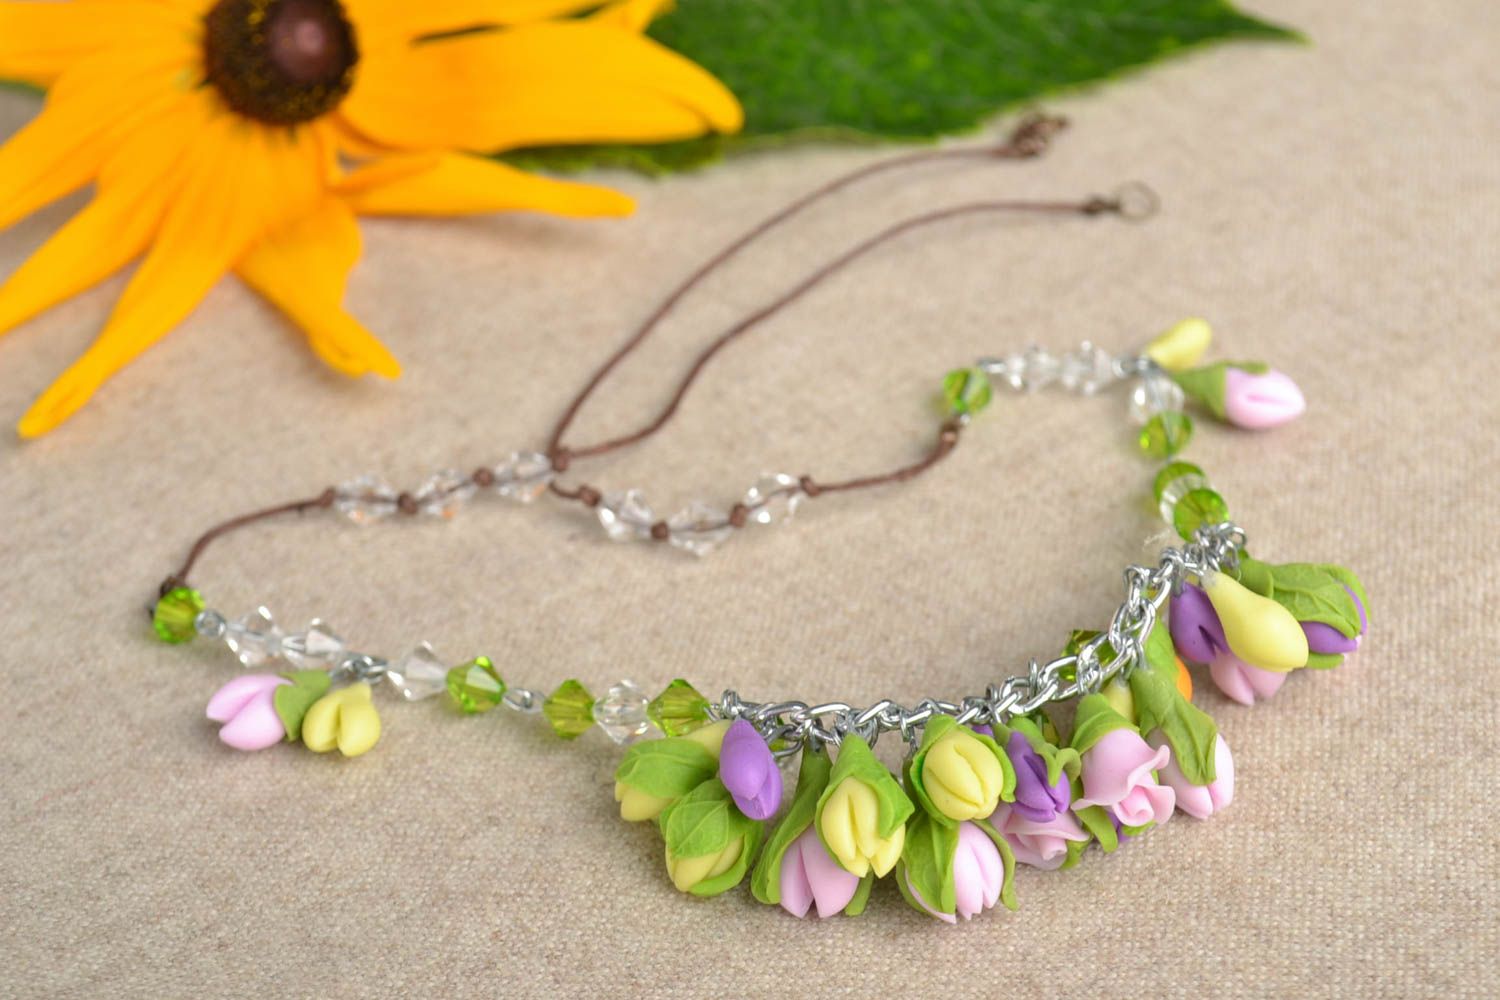 Handmade necklace flower necklace flower jewelry fashion accessories cool gifts photo 1